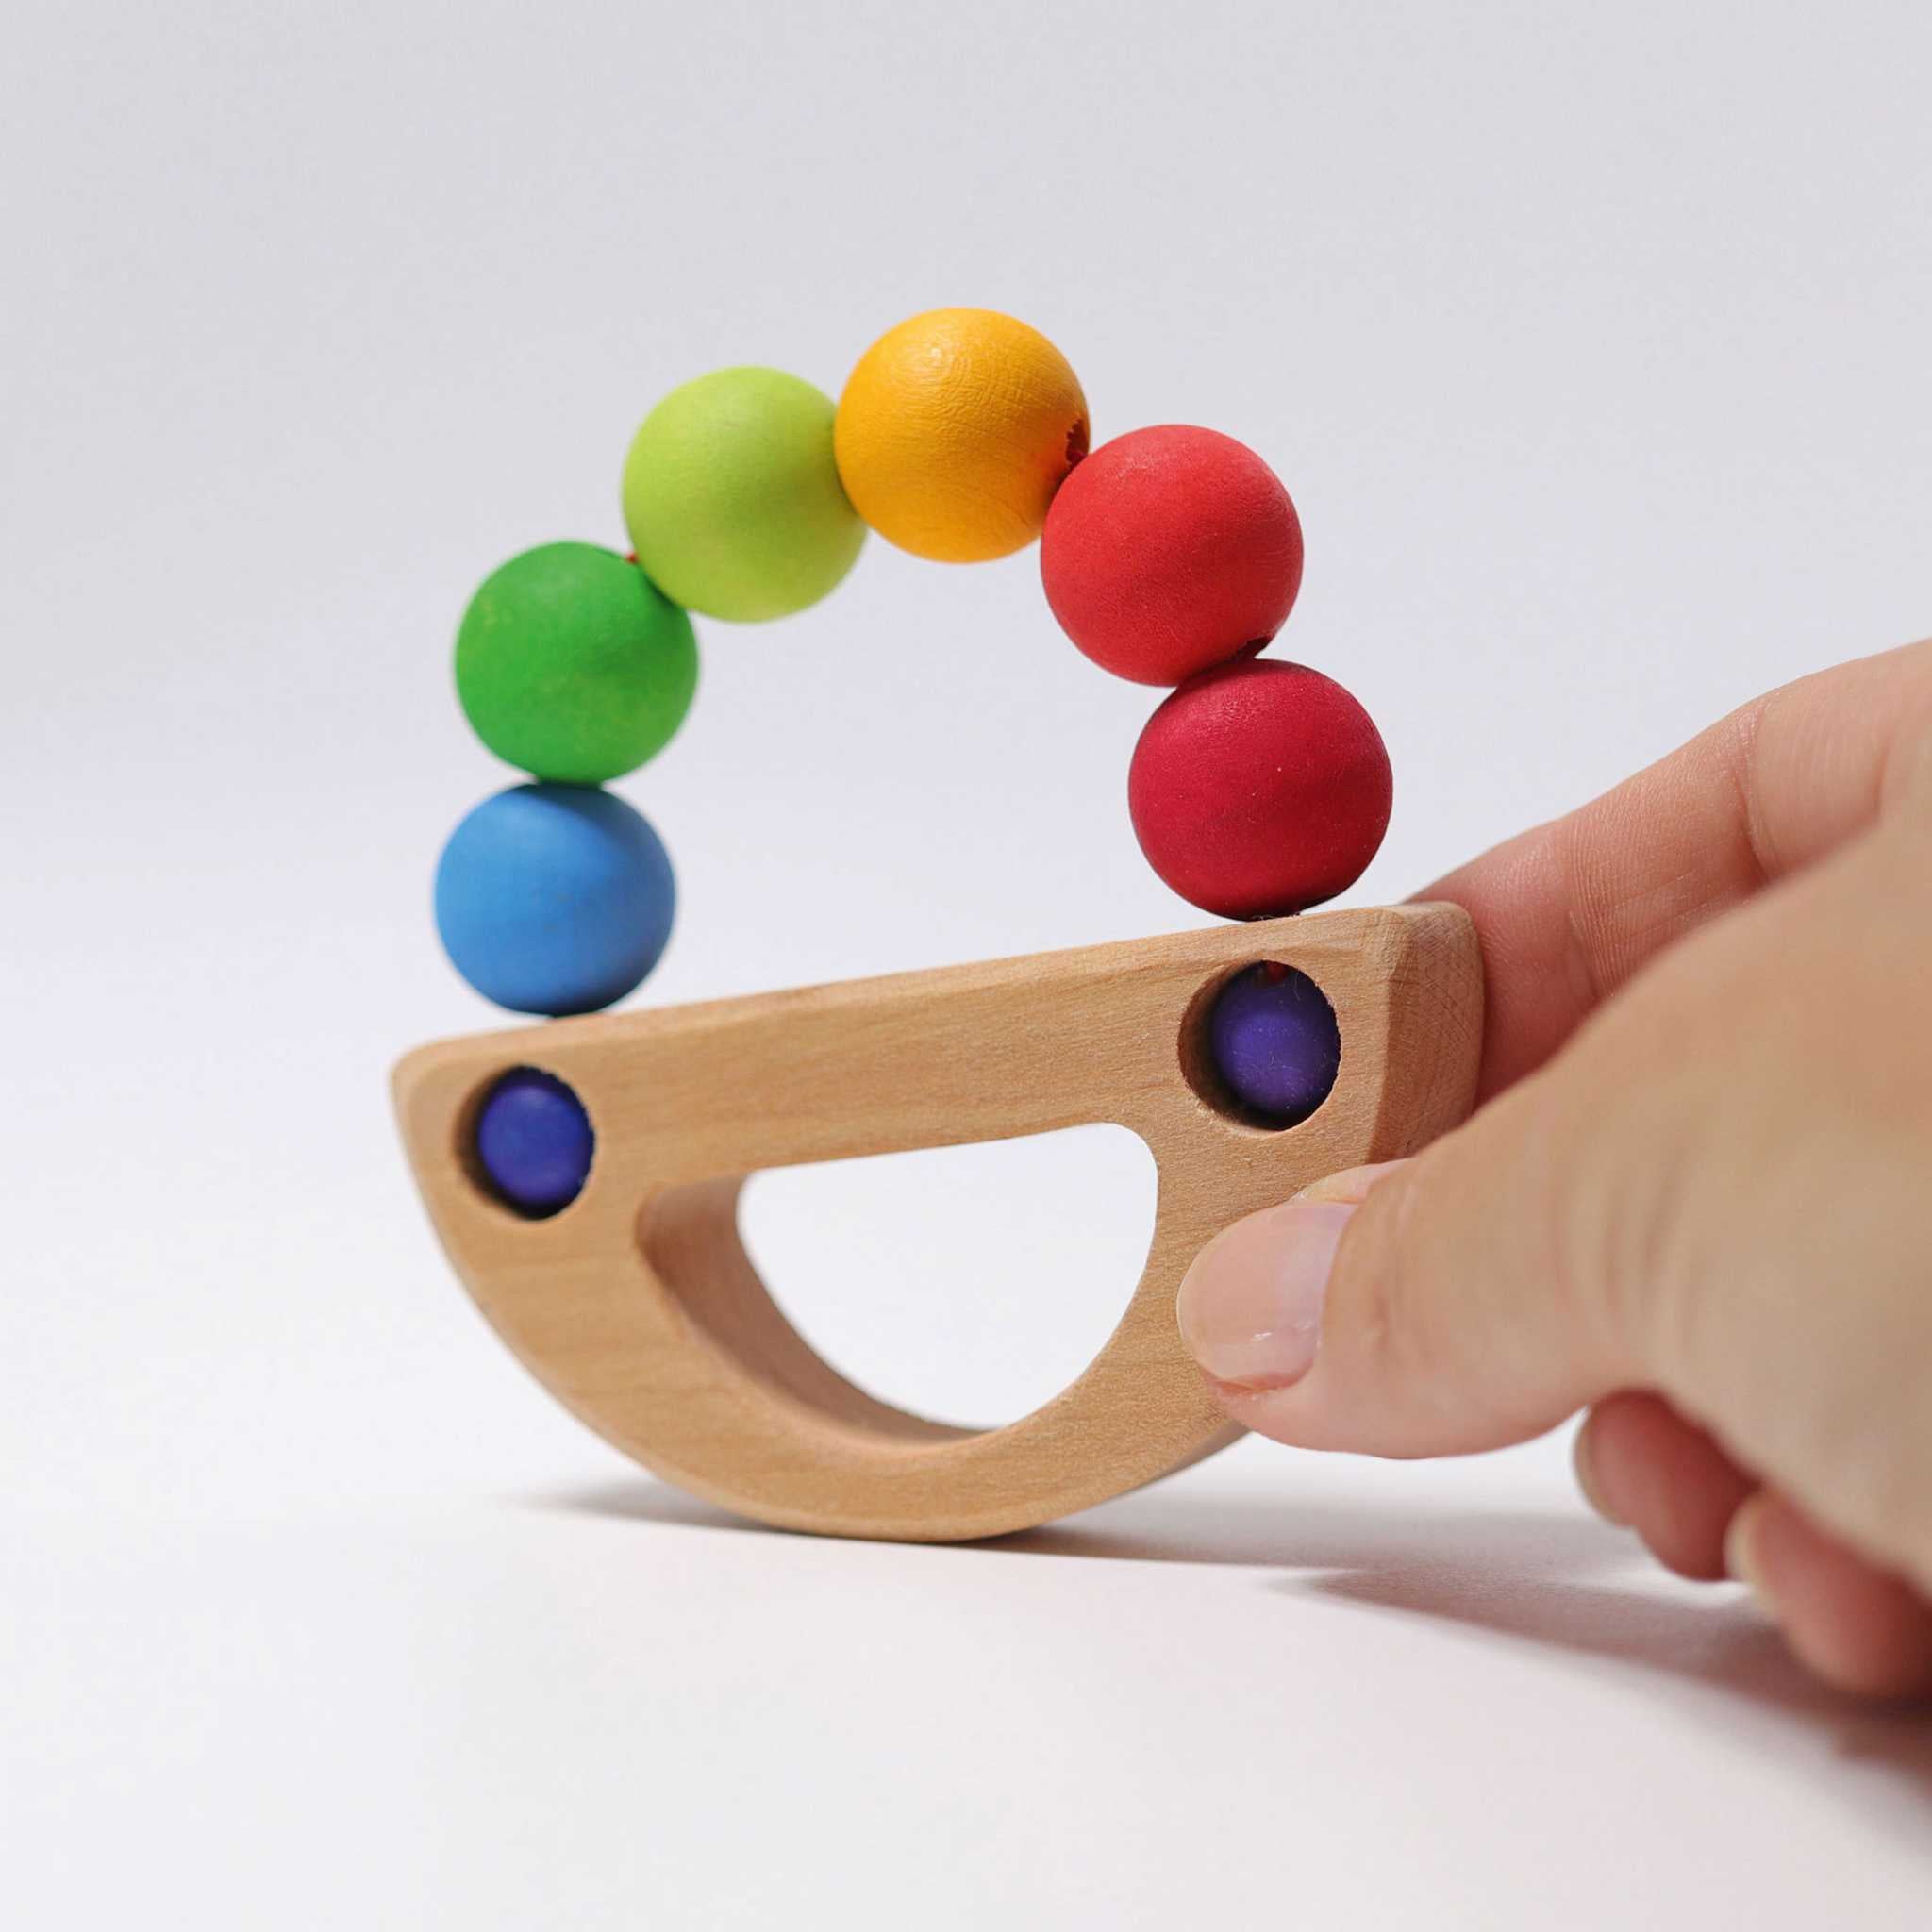 Grimm's Rainbow Boat Grasping Toy